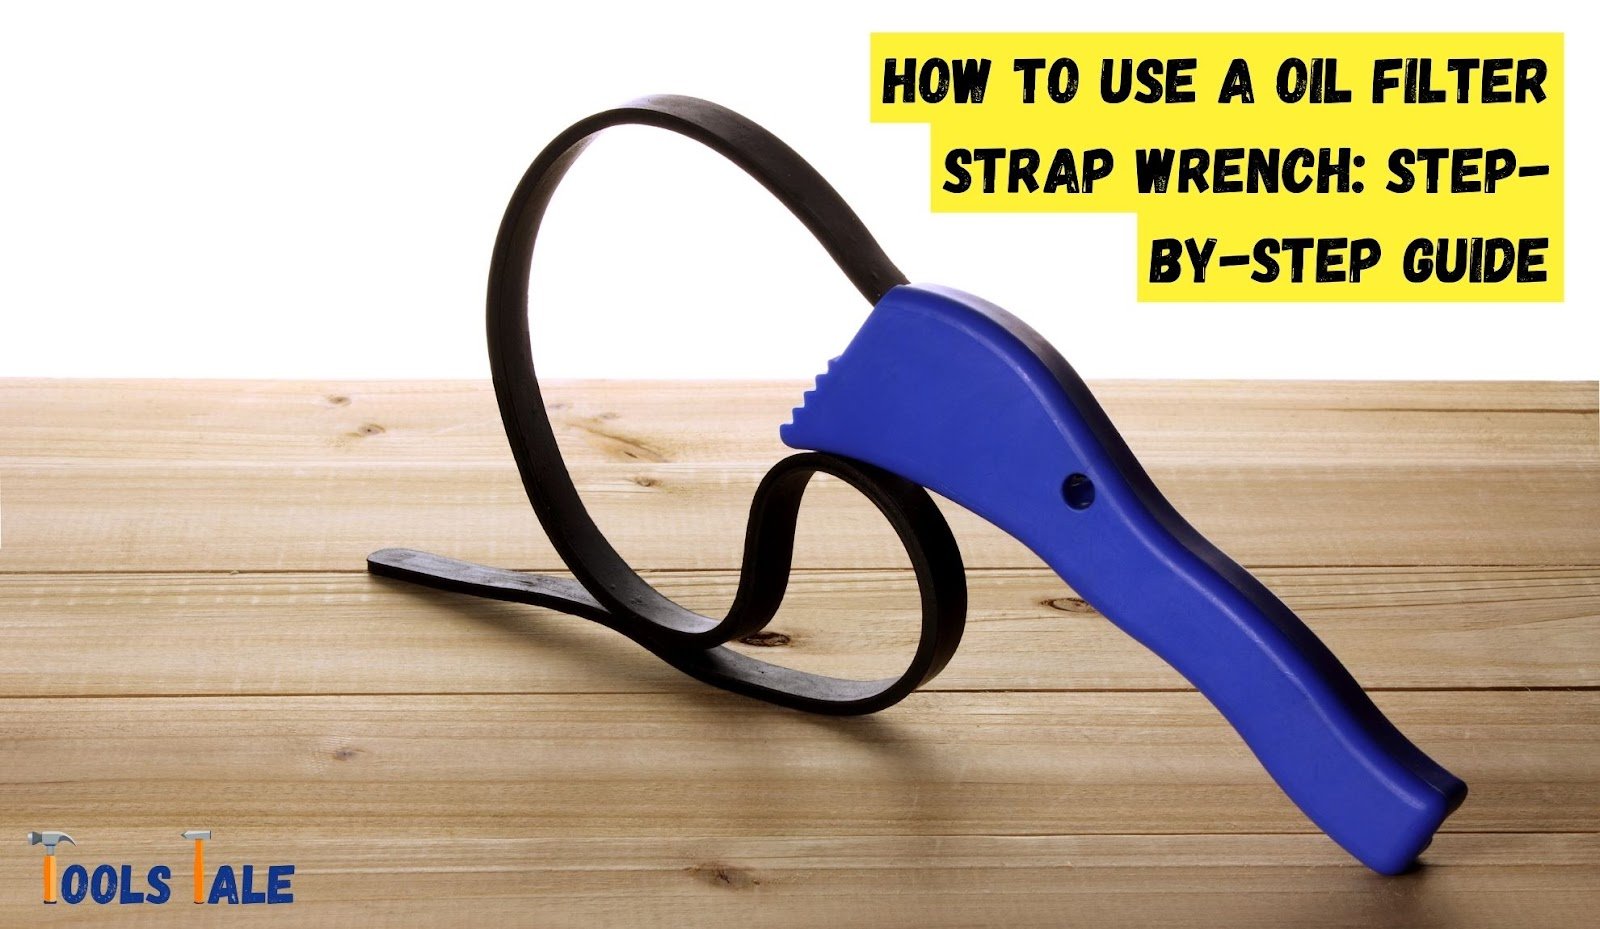 How to Use a Oil Filter Strap Wrench